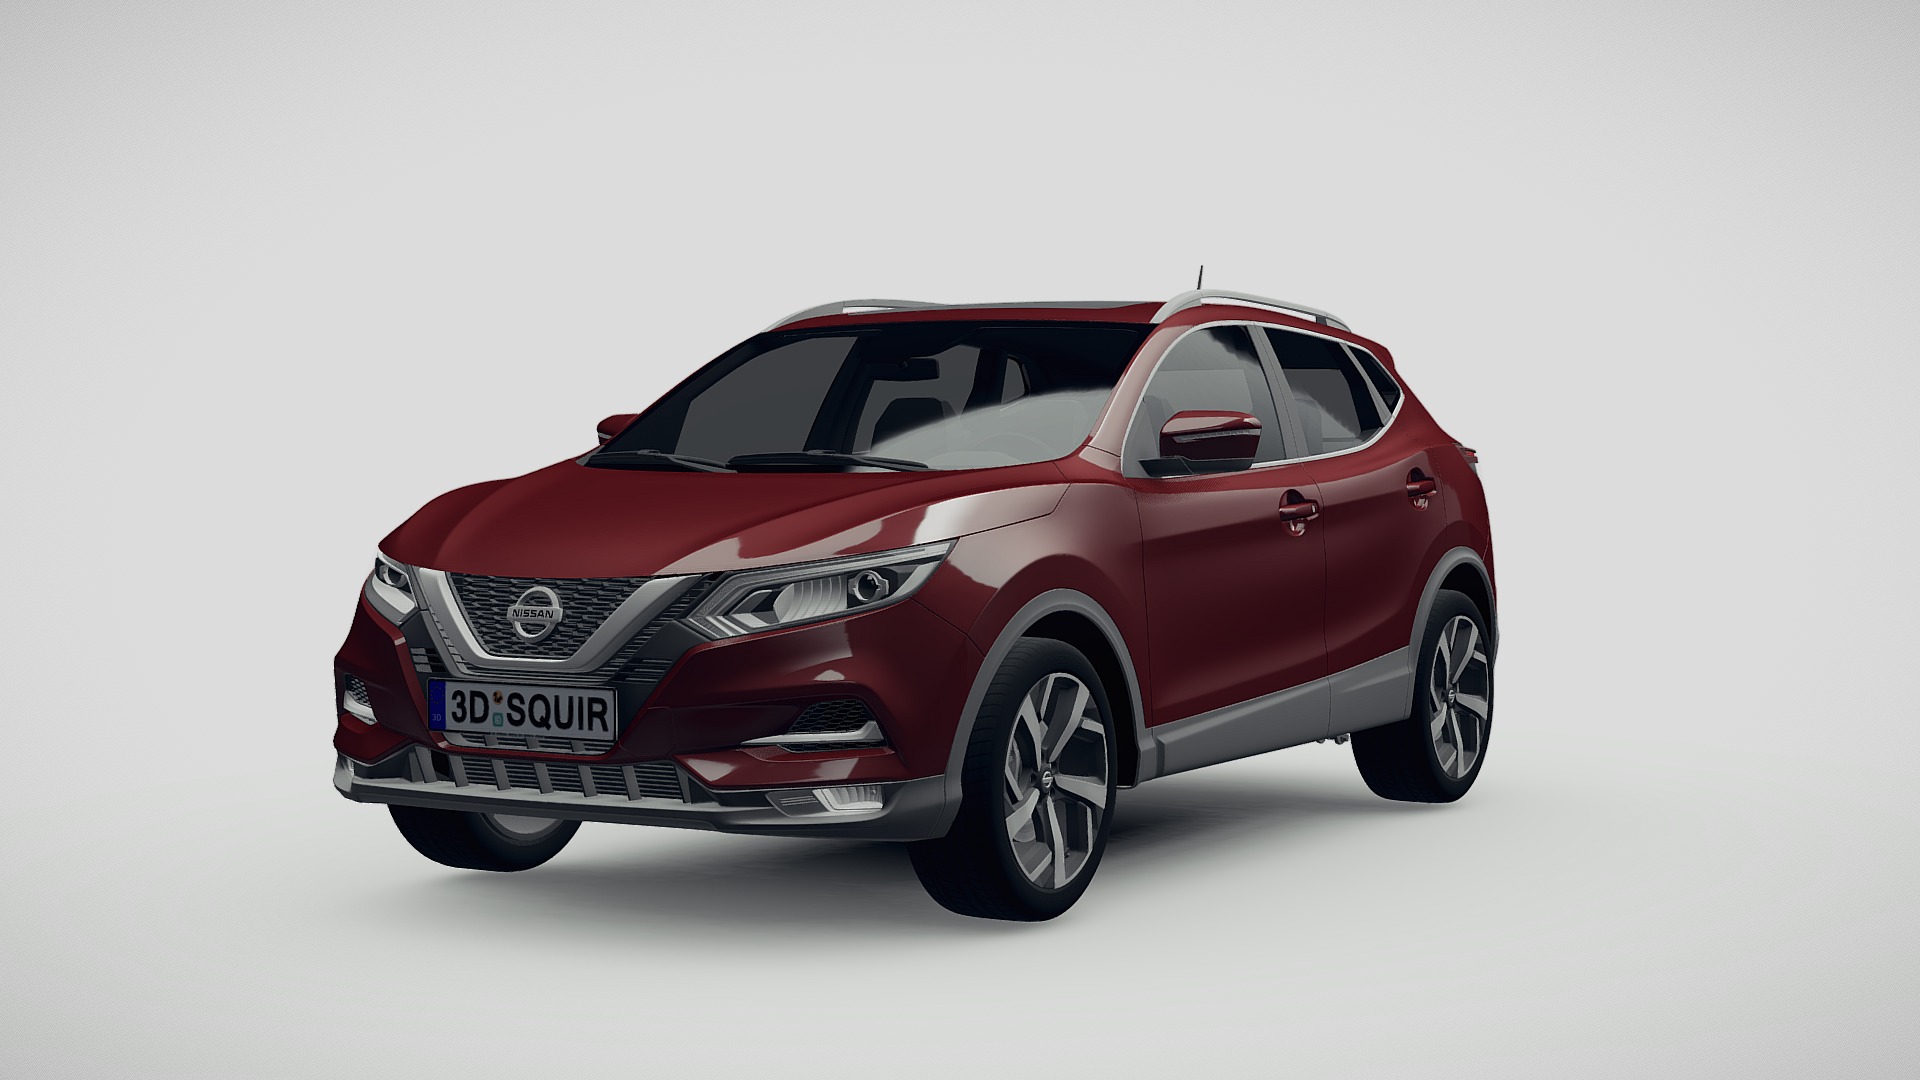 3D model Nissan Rogue Sport 2020 - This is a 3D model of the Nissan Rogue Sport 2020. The 3D model is about a red car with a white background.